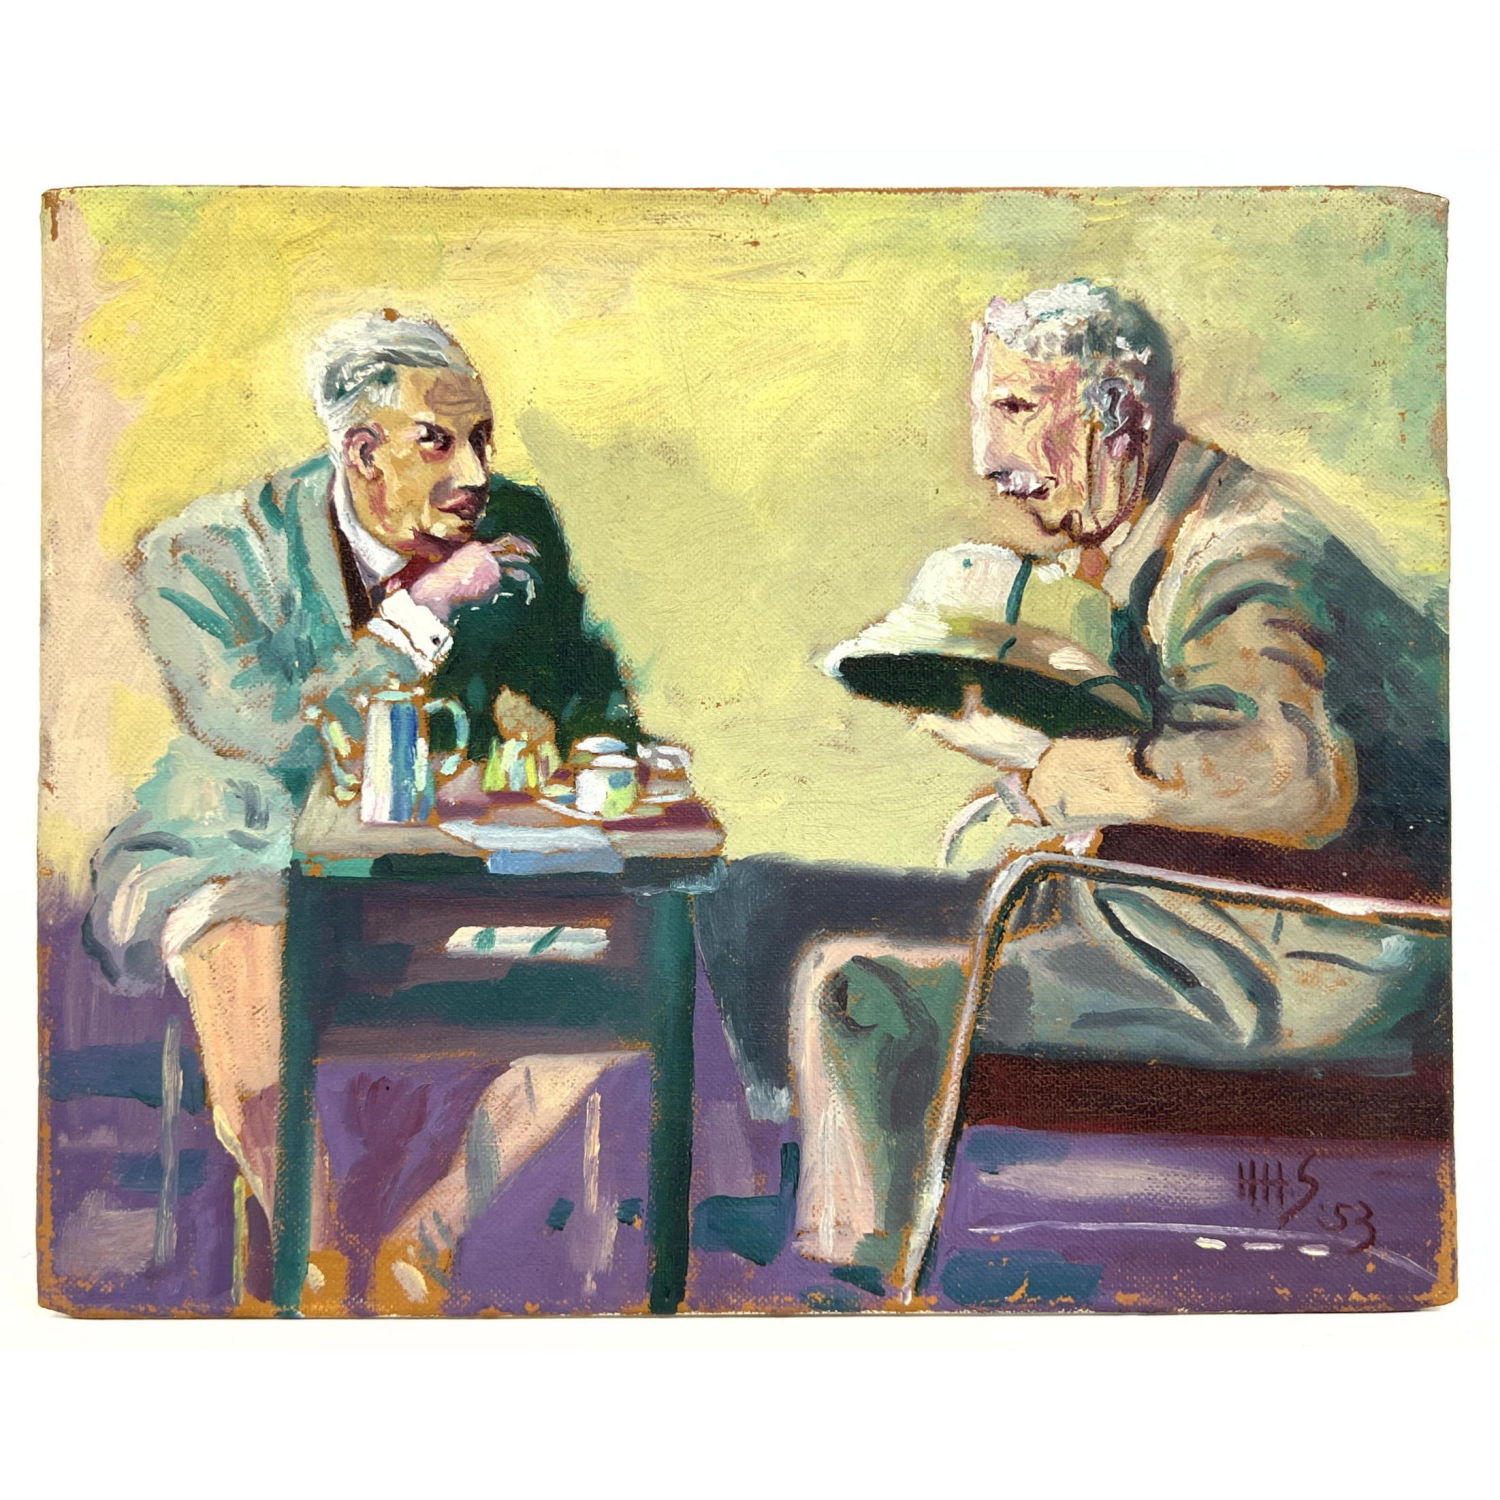 Signed HHS 53 Painting of Two Gentlemen